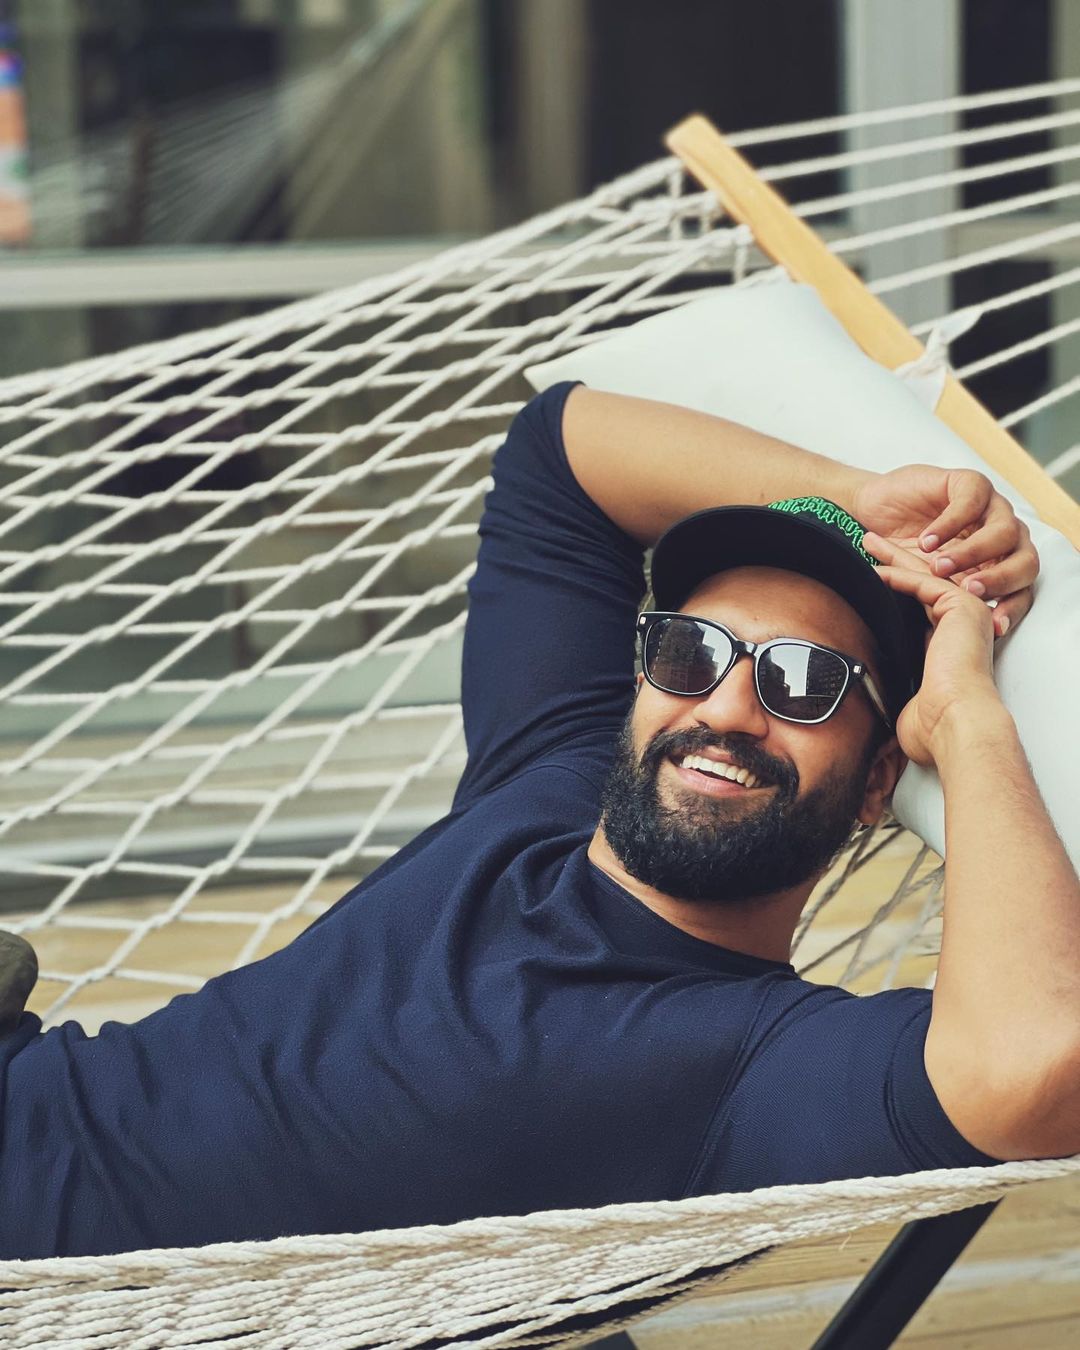 Vicky Kaushal looks smart in the blue tee and cap